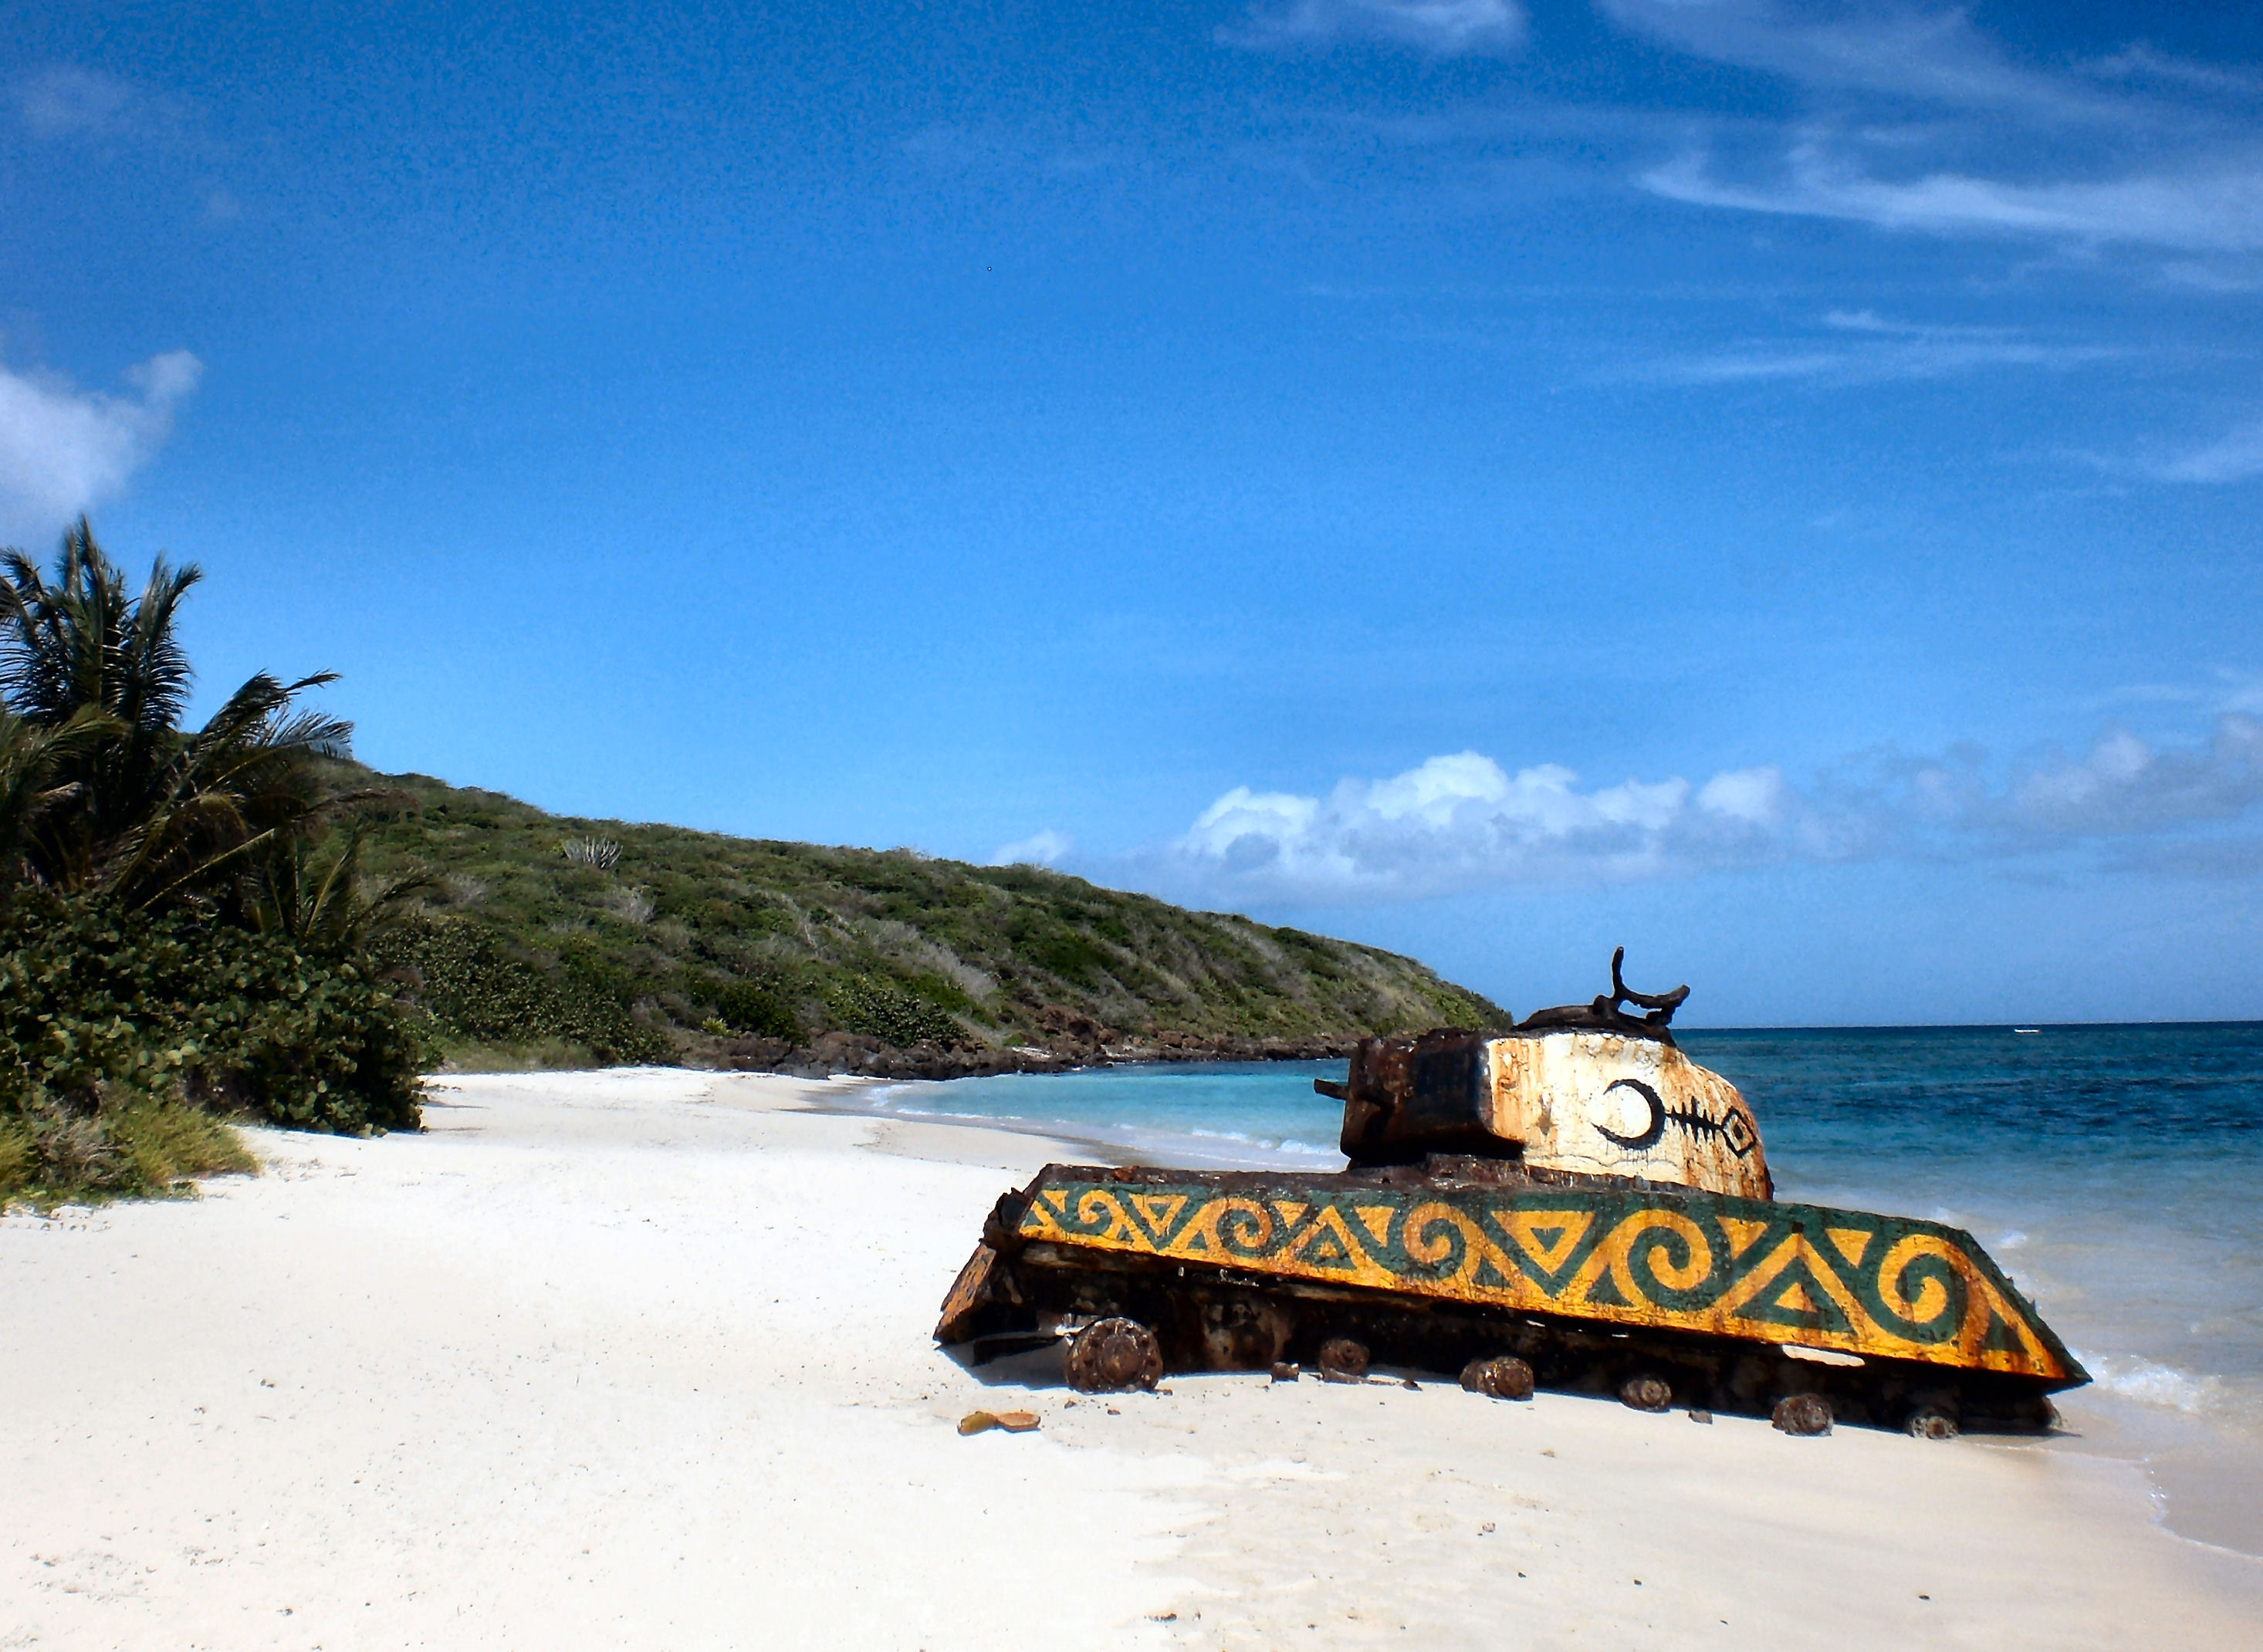 An abandoned tank on the white sands of Flamingo Beach, Pureto Rico which has been painted in yellow and green by a local artist